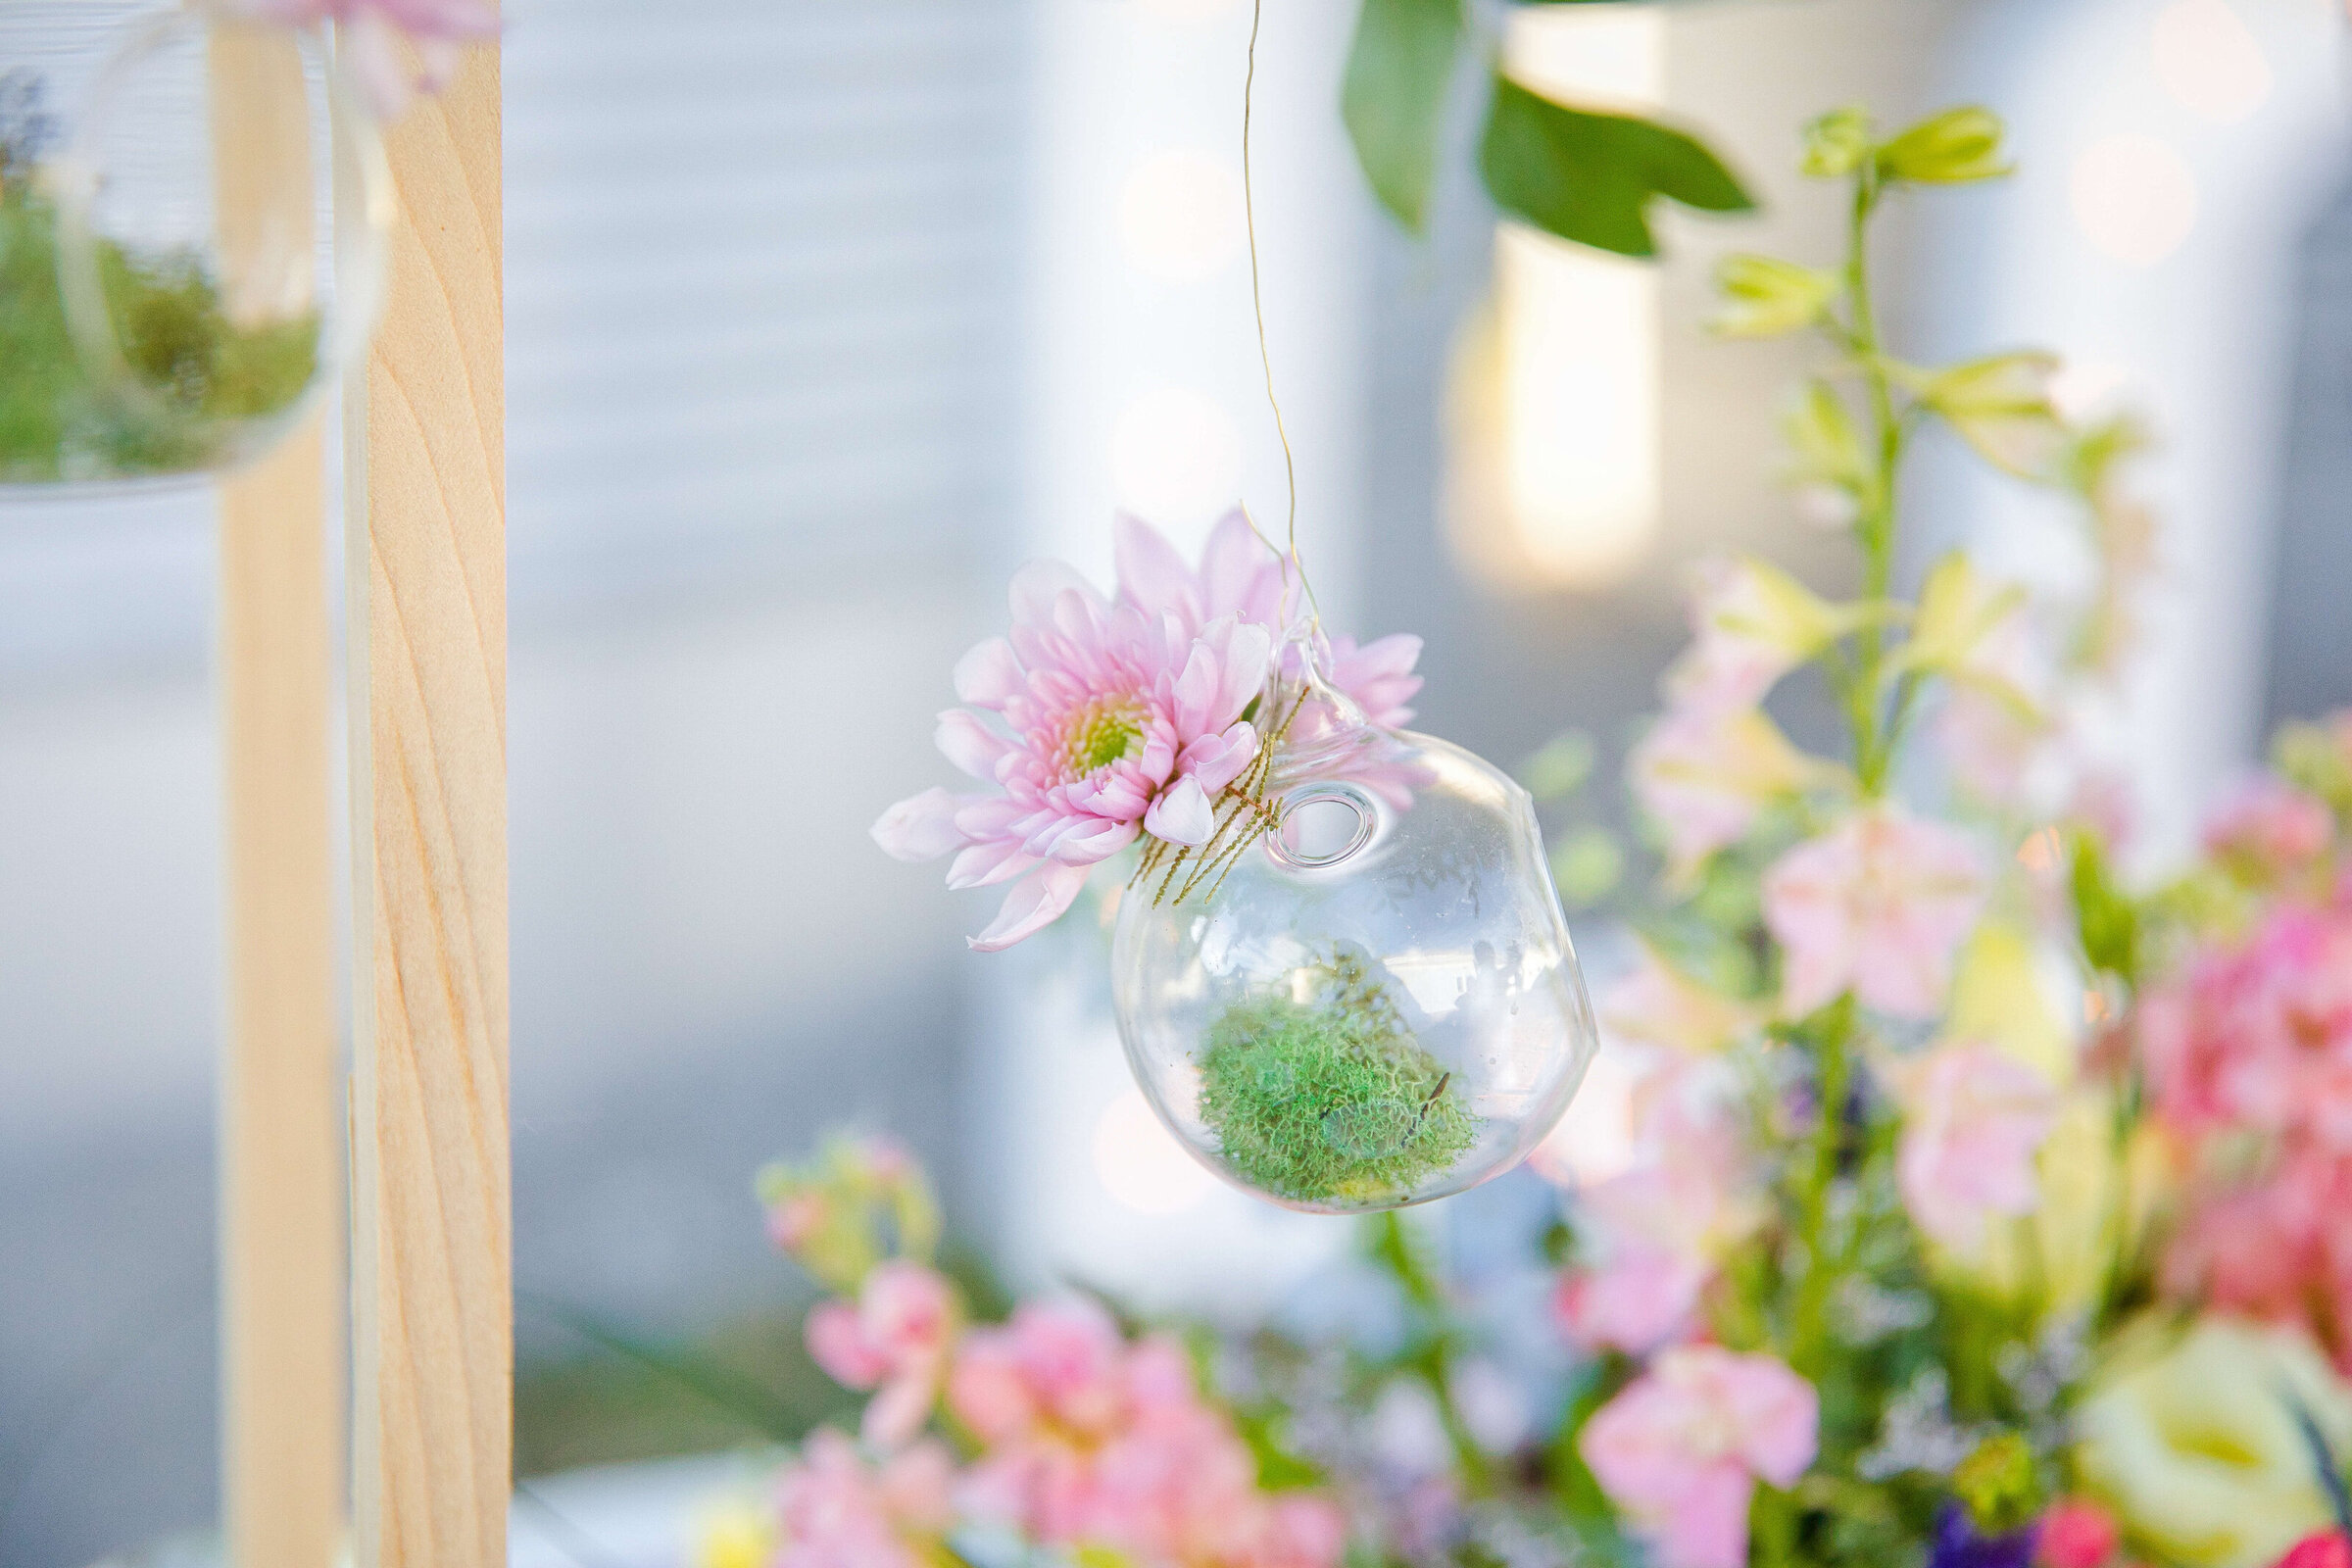 Glass bubble vase hangs in the air with a flower in it and there are other flowers in the background